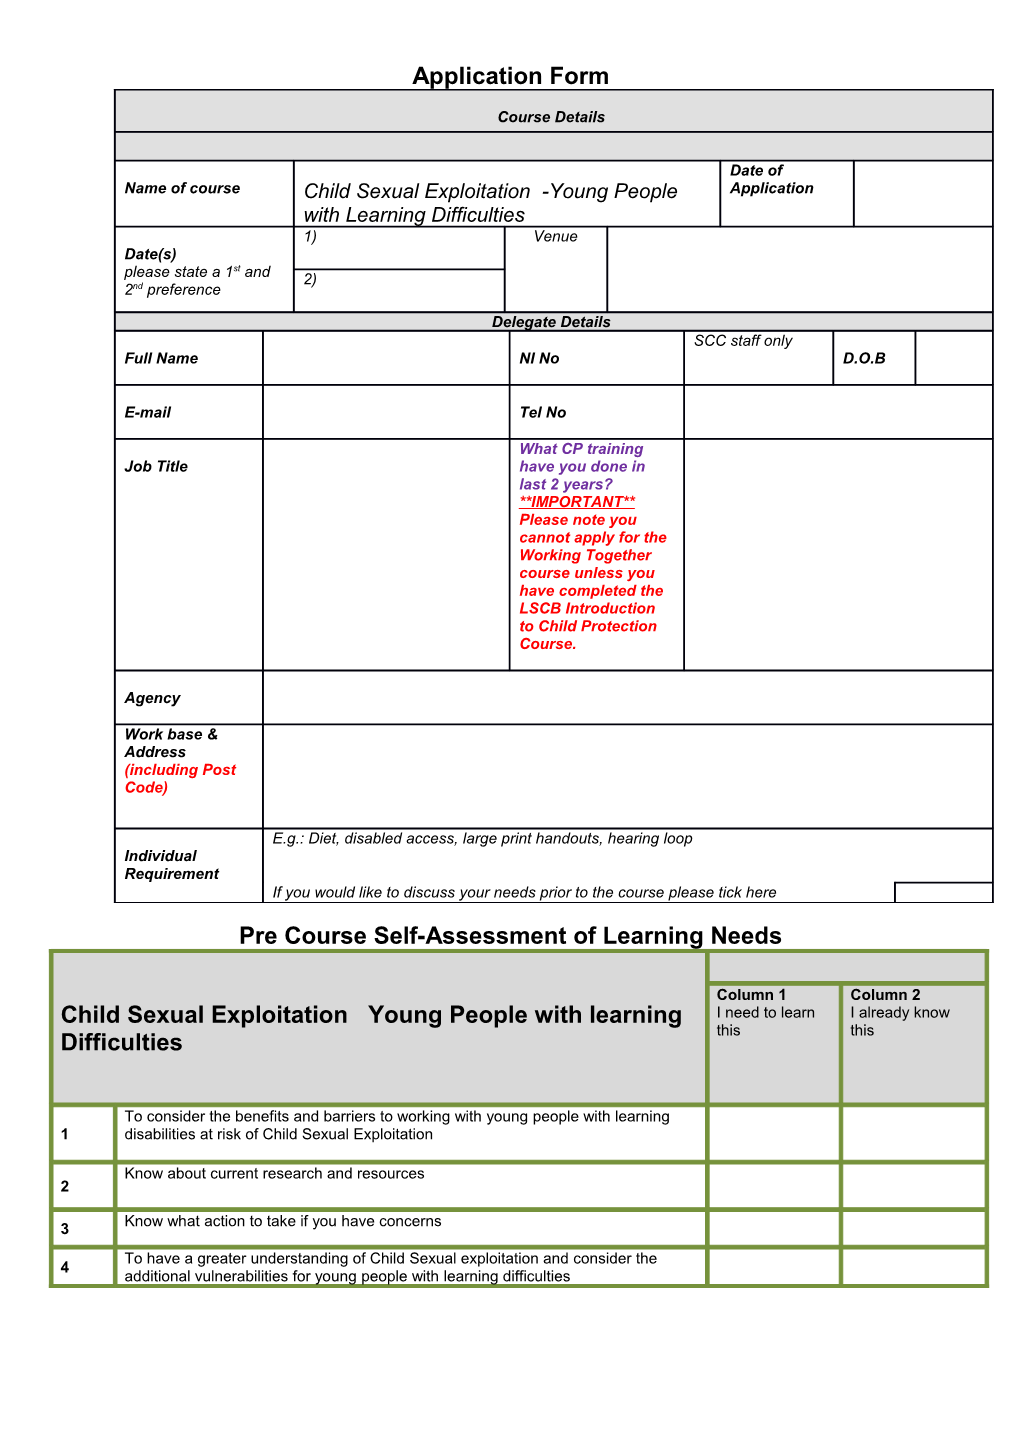 Pre Course Self-Assessment of Learning Needs